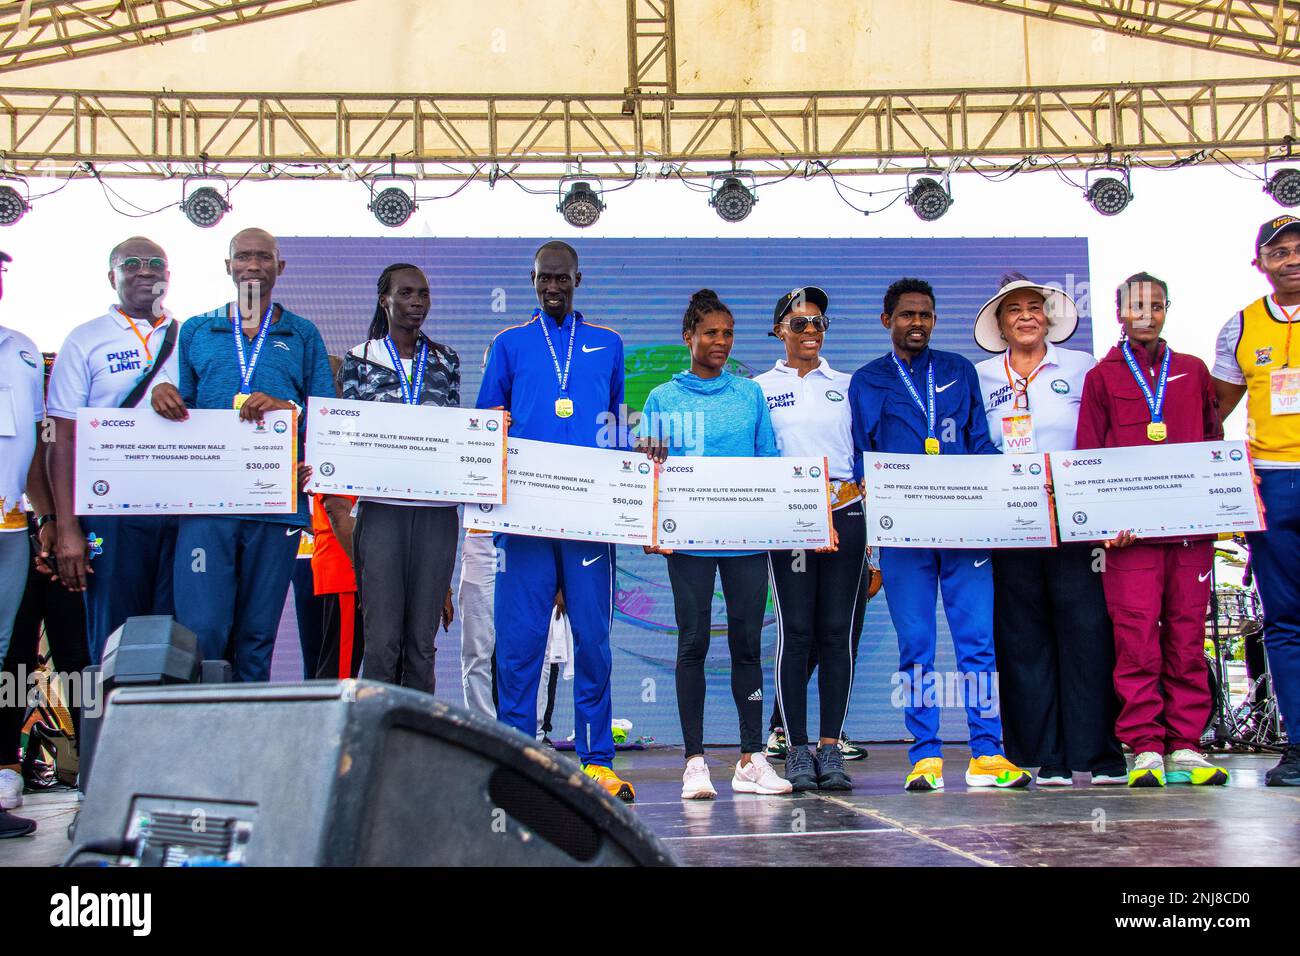 The winners receiving their medals and cheques at the 8th edition of the Access Bank Lagos City Marathon. Lagos, Nigeria. Stock Photo